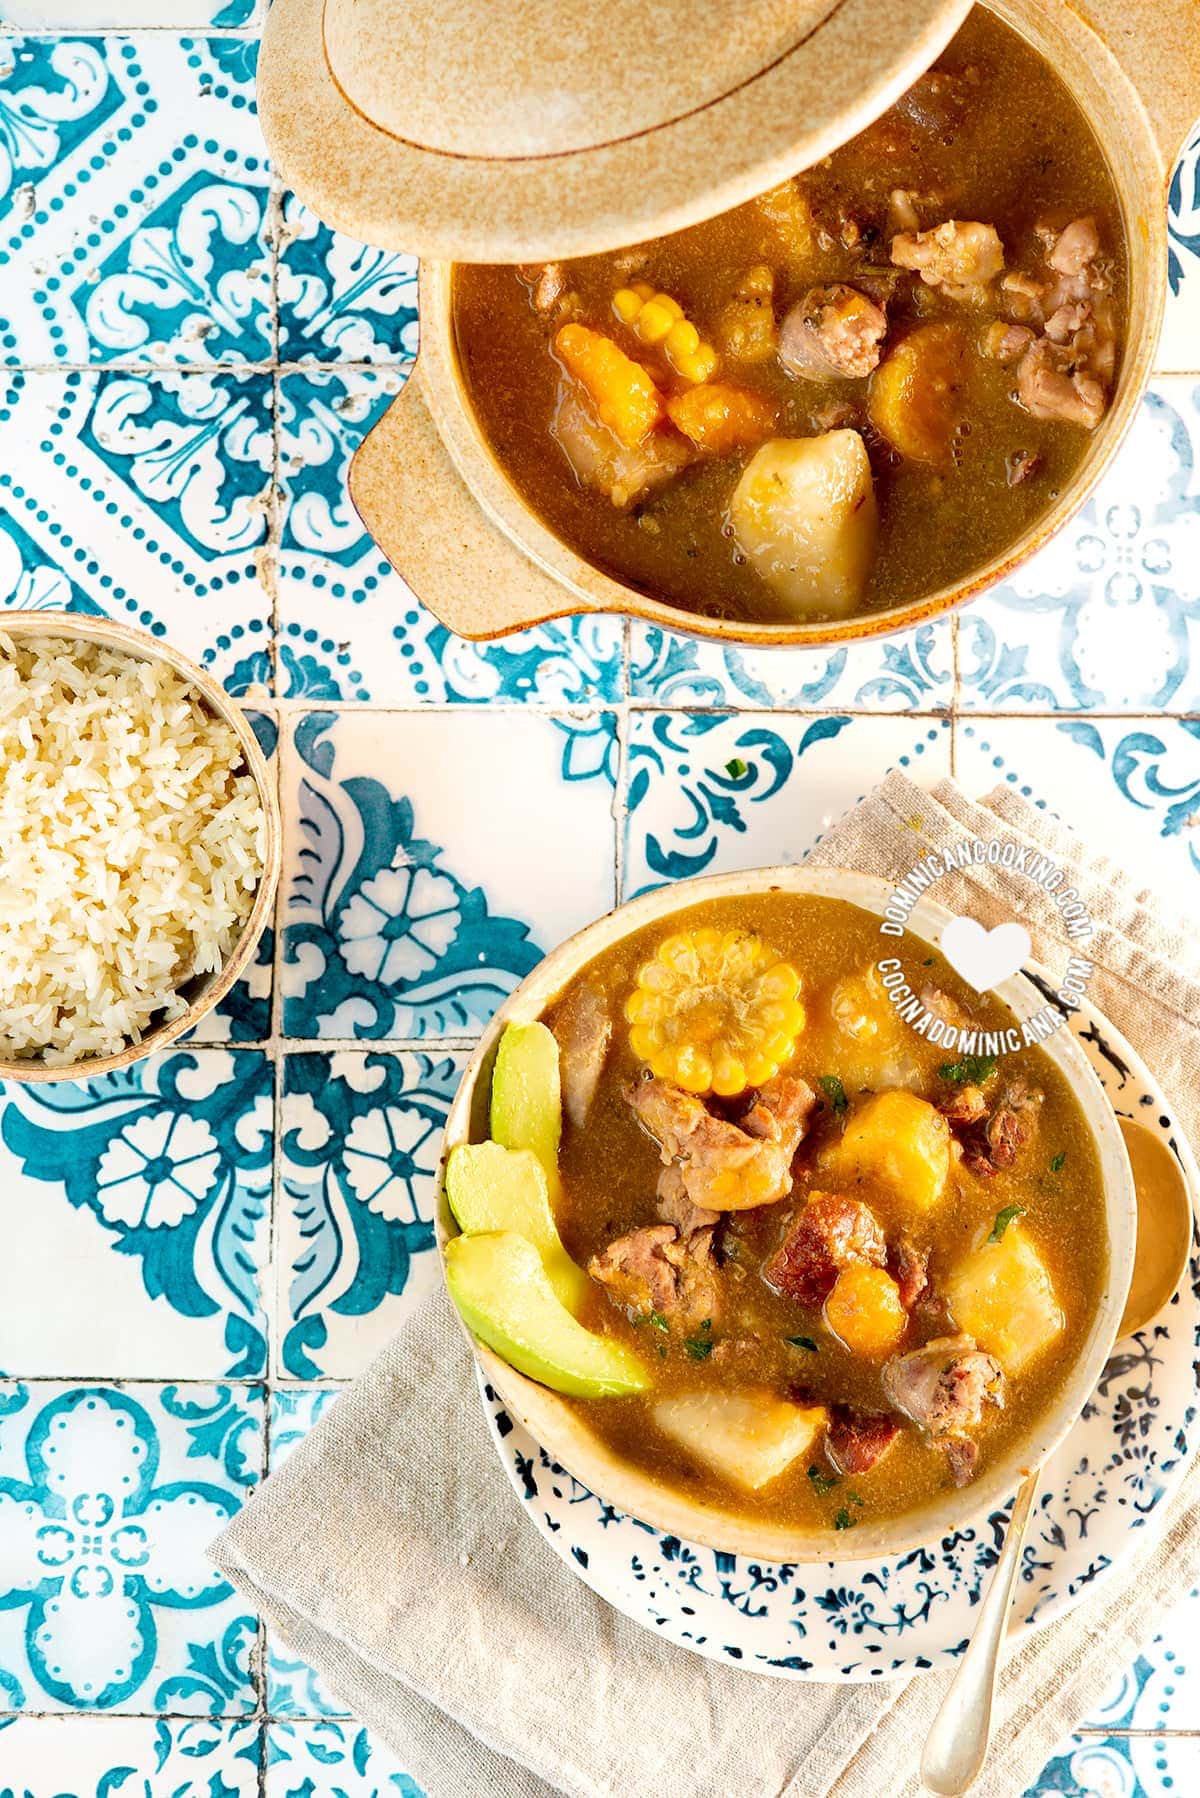 Sancocho de Siete Carnes (Seven Meat Stew) served with rice and avocado.